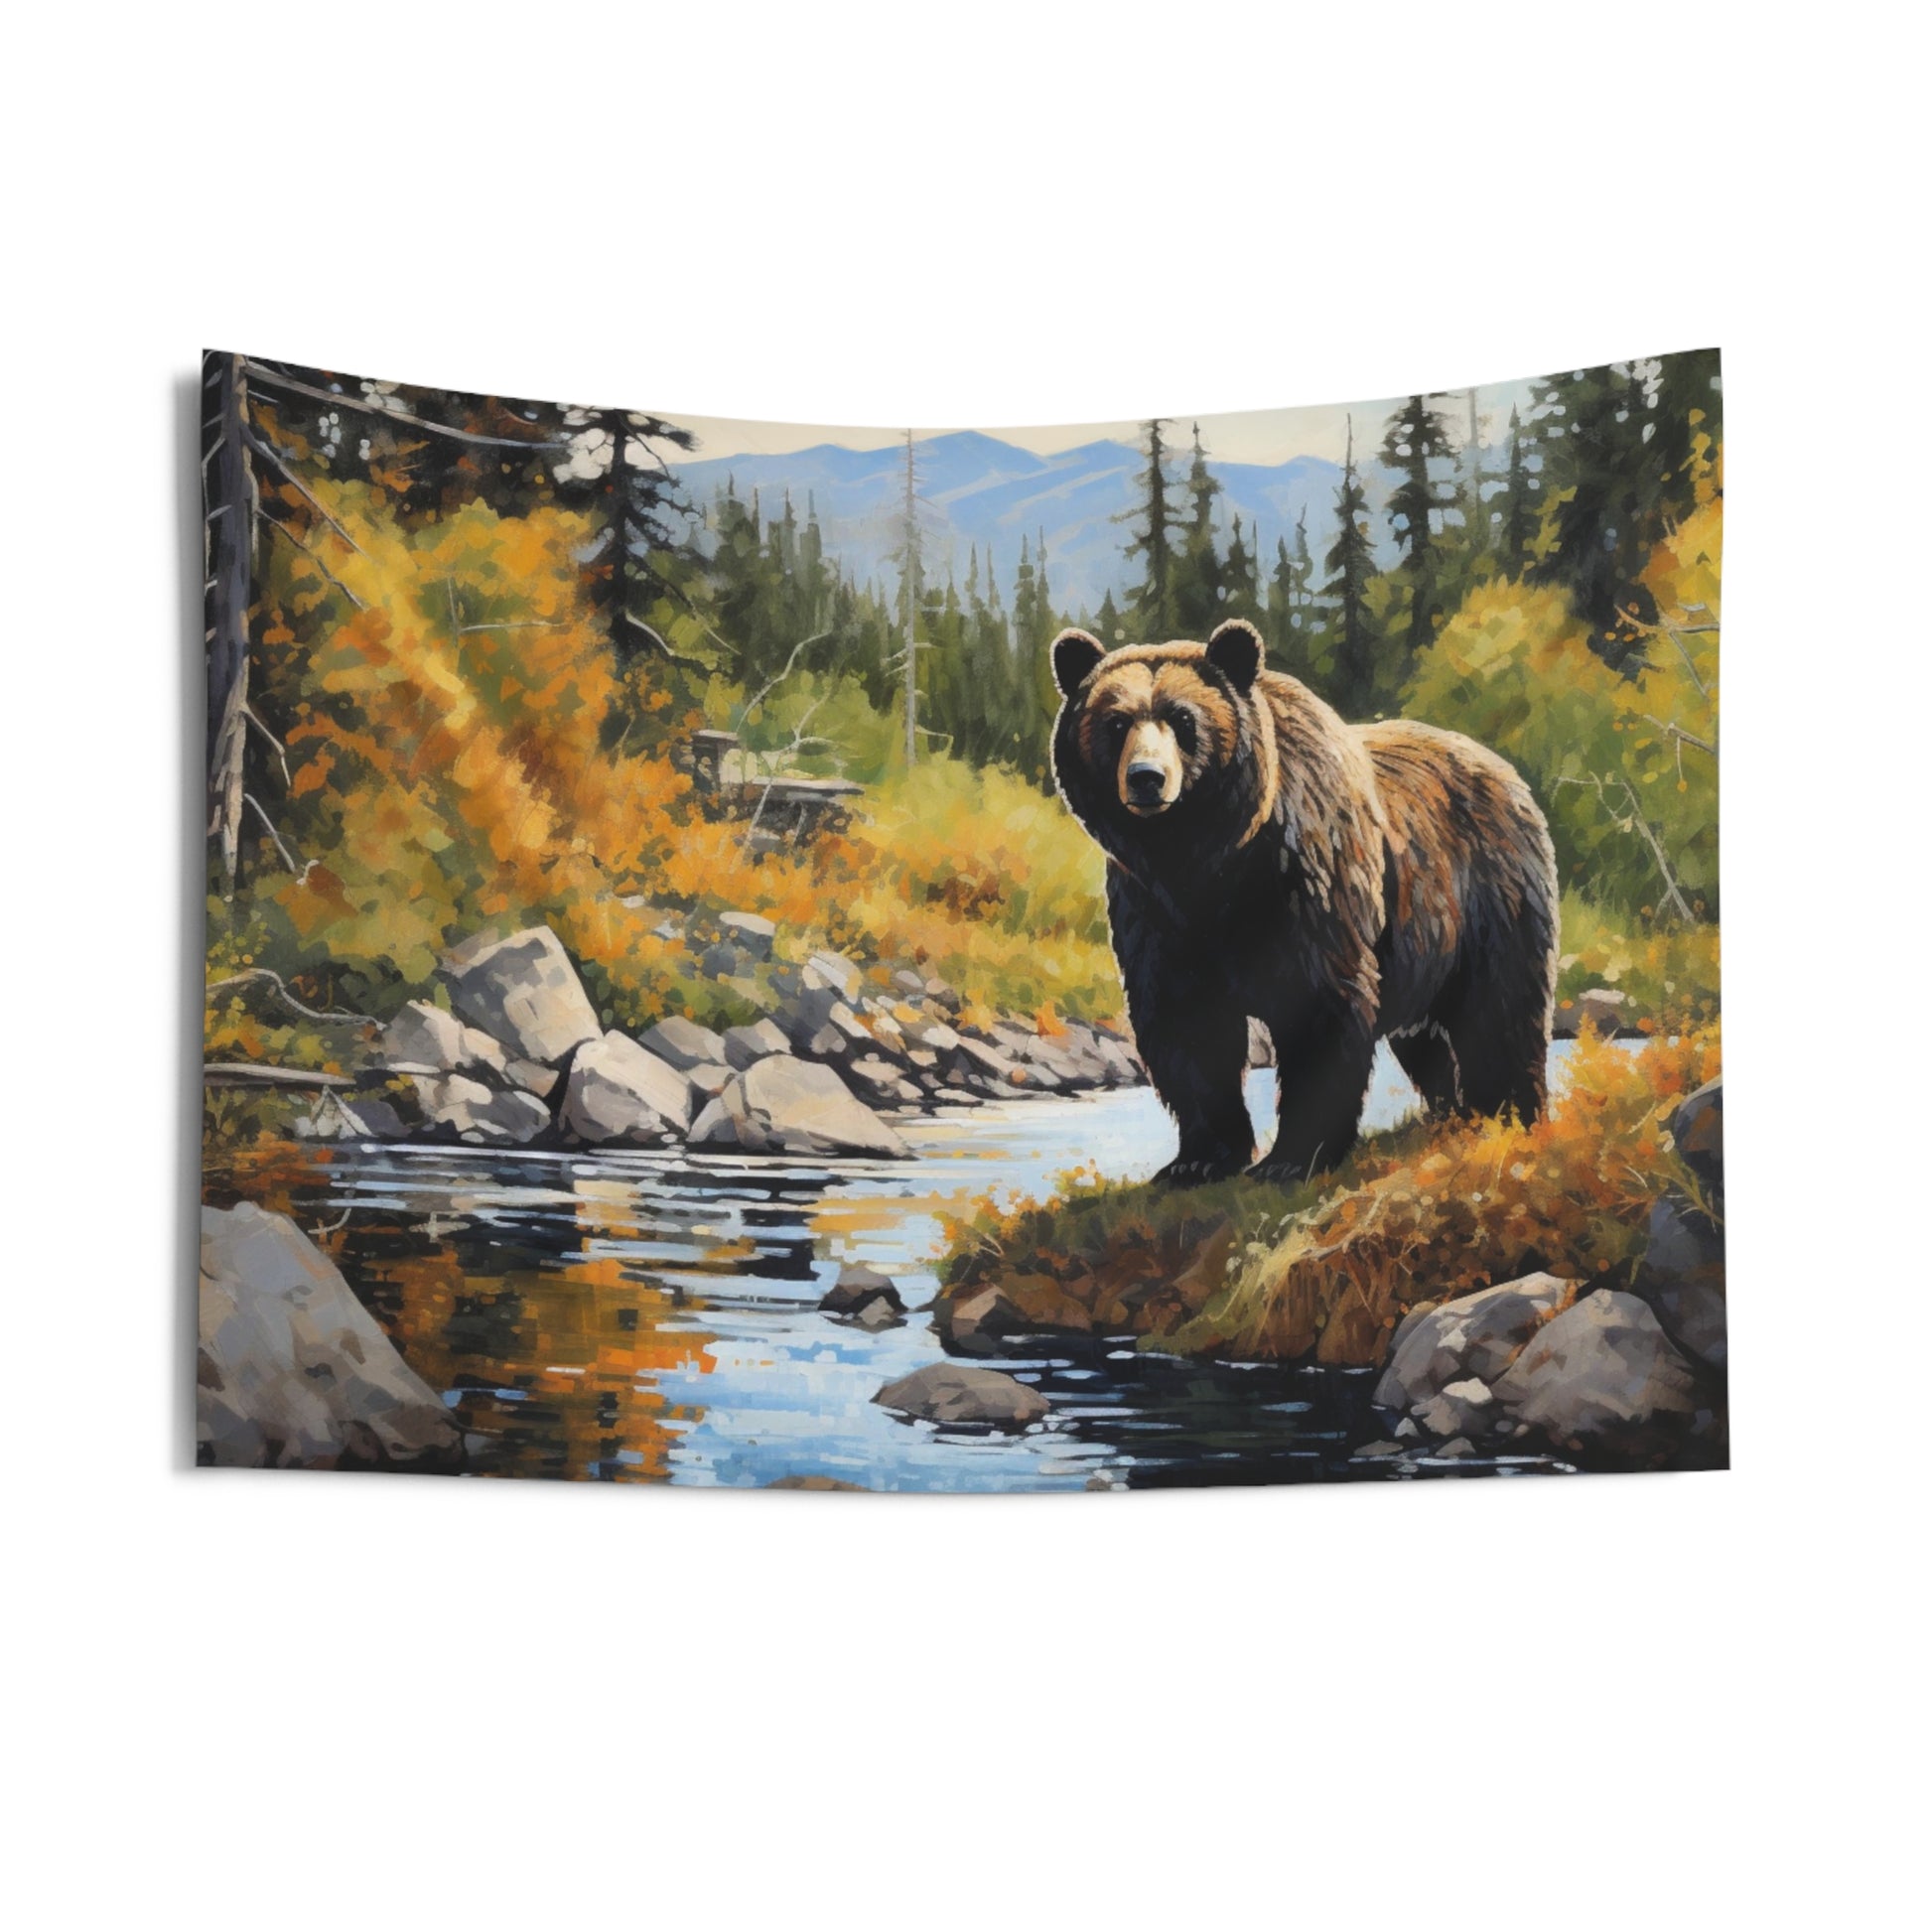 Bear Tapestry, Wilderness Mountain Wall Art Hanging Cool Unique Landscape Aesthetic Large Small Decor Bedroom College Dorm Room Starcove Fashion